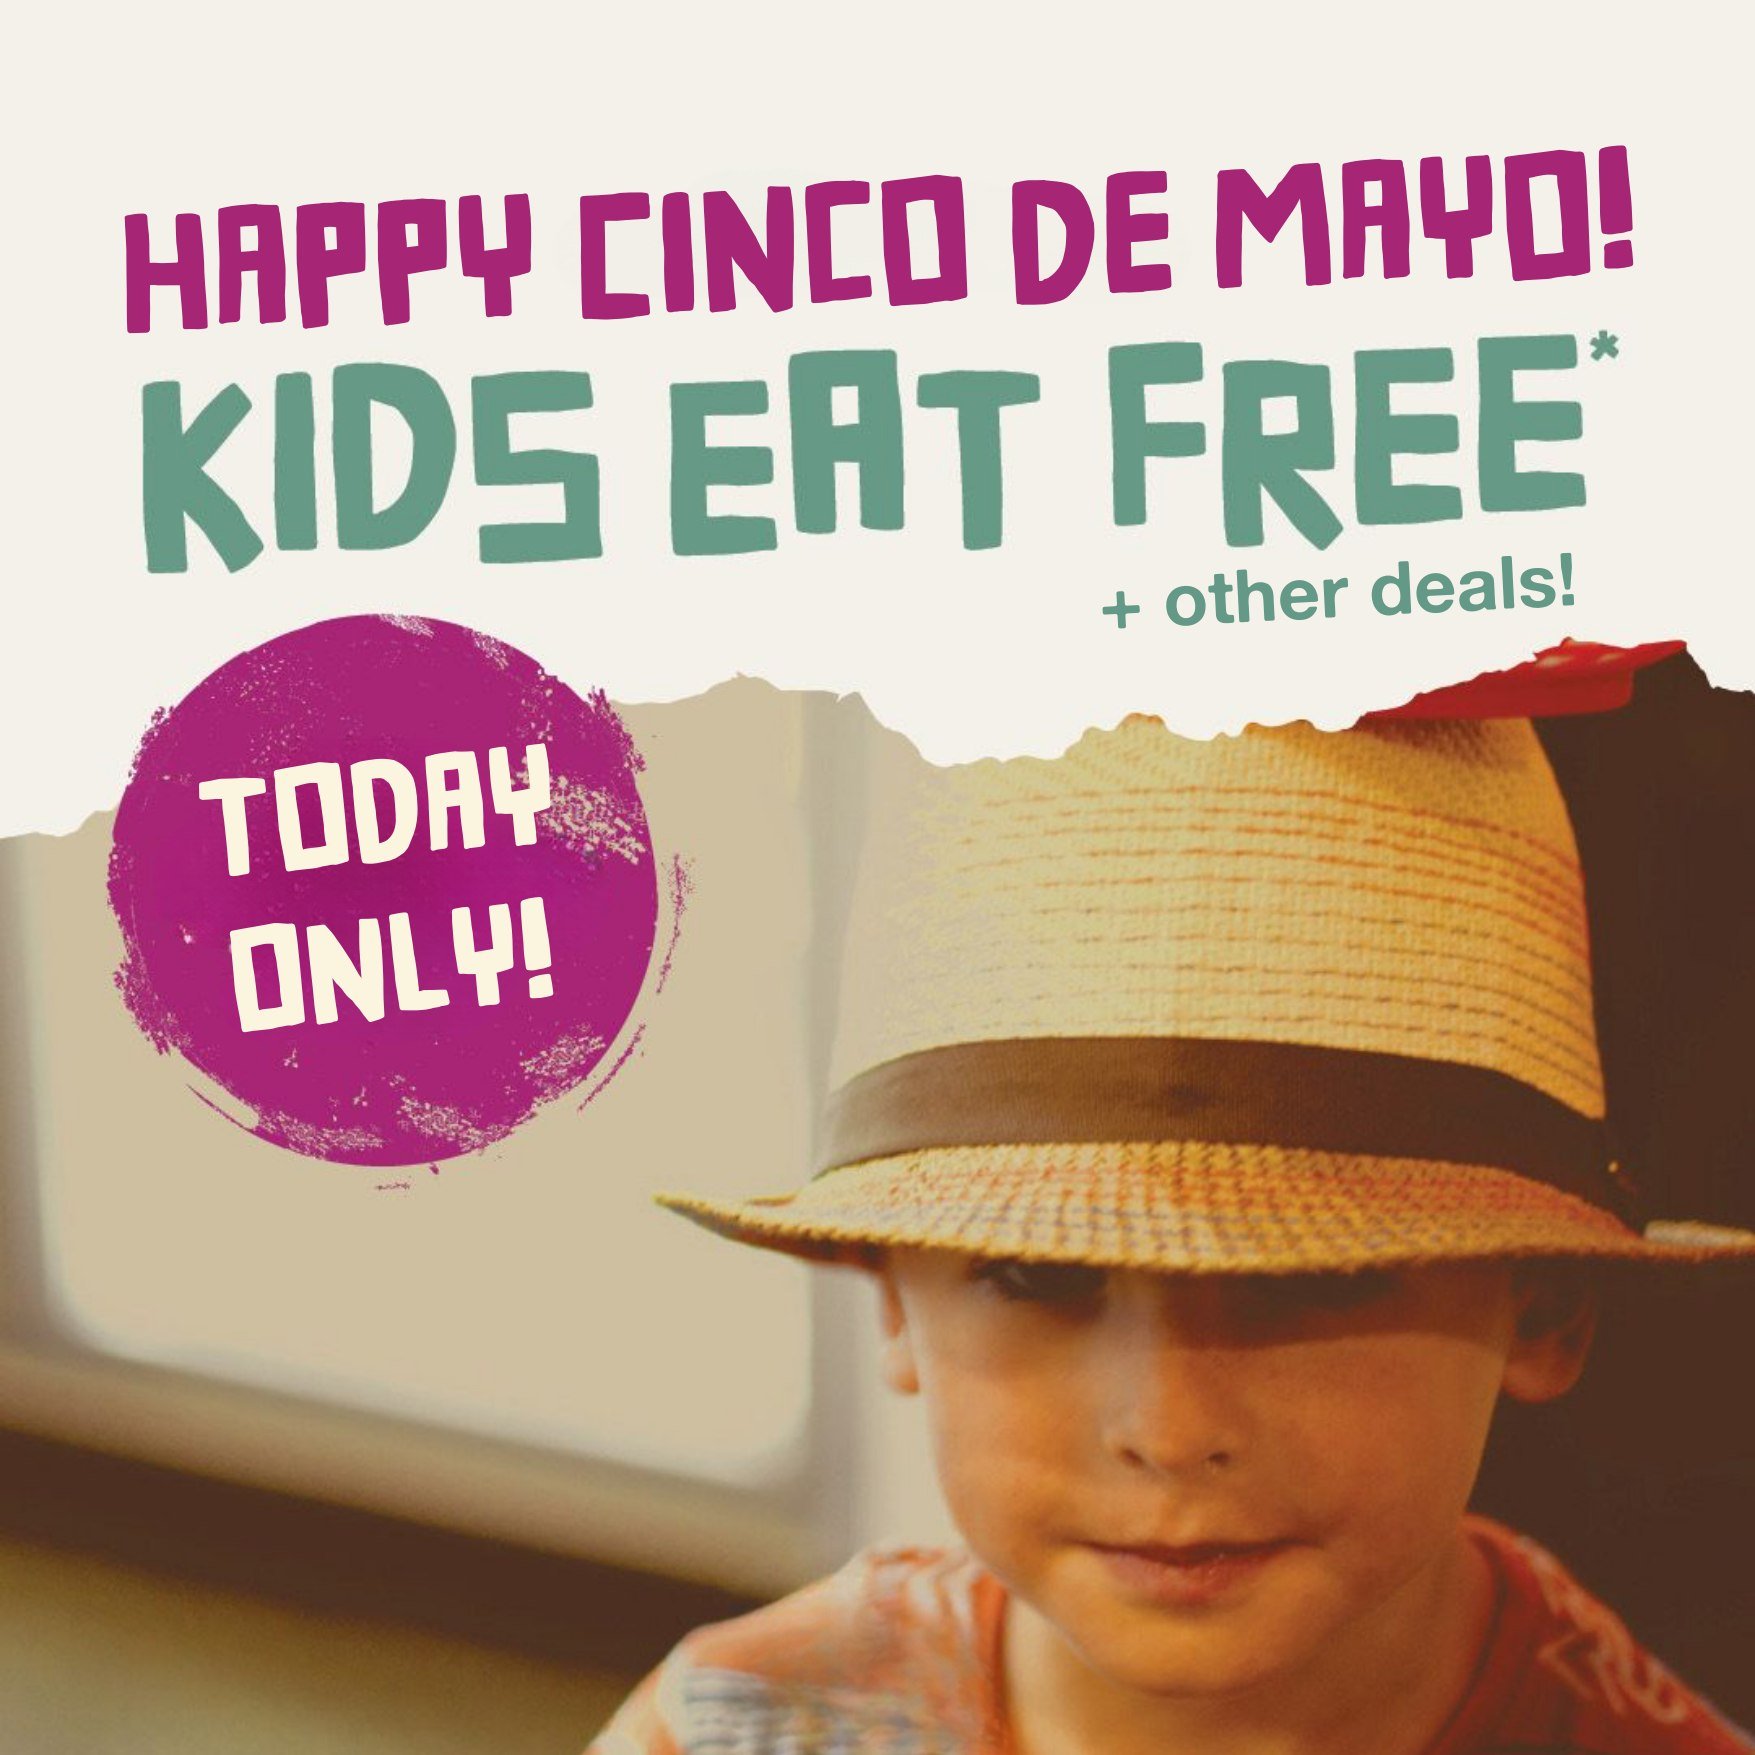 HAPPY CINCO DE MAYO! 🇲🇽

Don't forget to come down to your local Mexi TODAY to celebrate with...
👧 Kids Eat Free*
🎨 Free Face Painting 12-2pm
🥤 Free V Zero Sugar Original*
🍦 Jarritos Floats
‼️ Giveaways

See you soon!

*T&amp;Cs Apply. Subject 